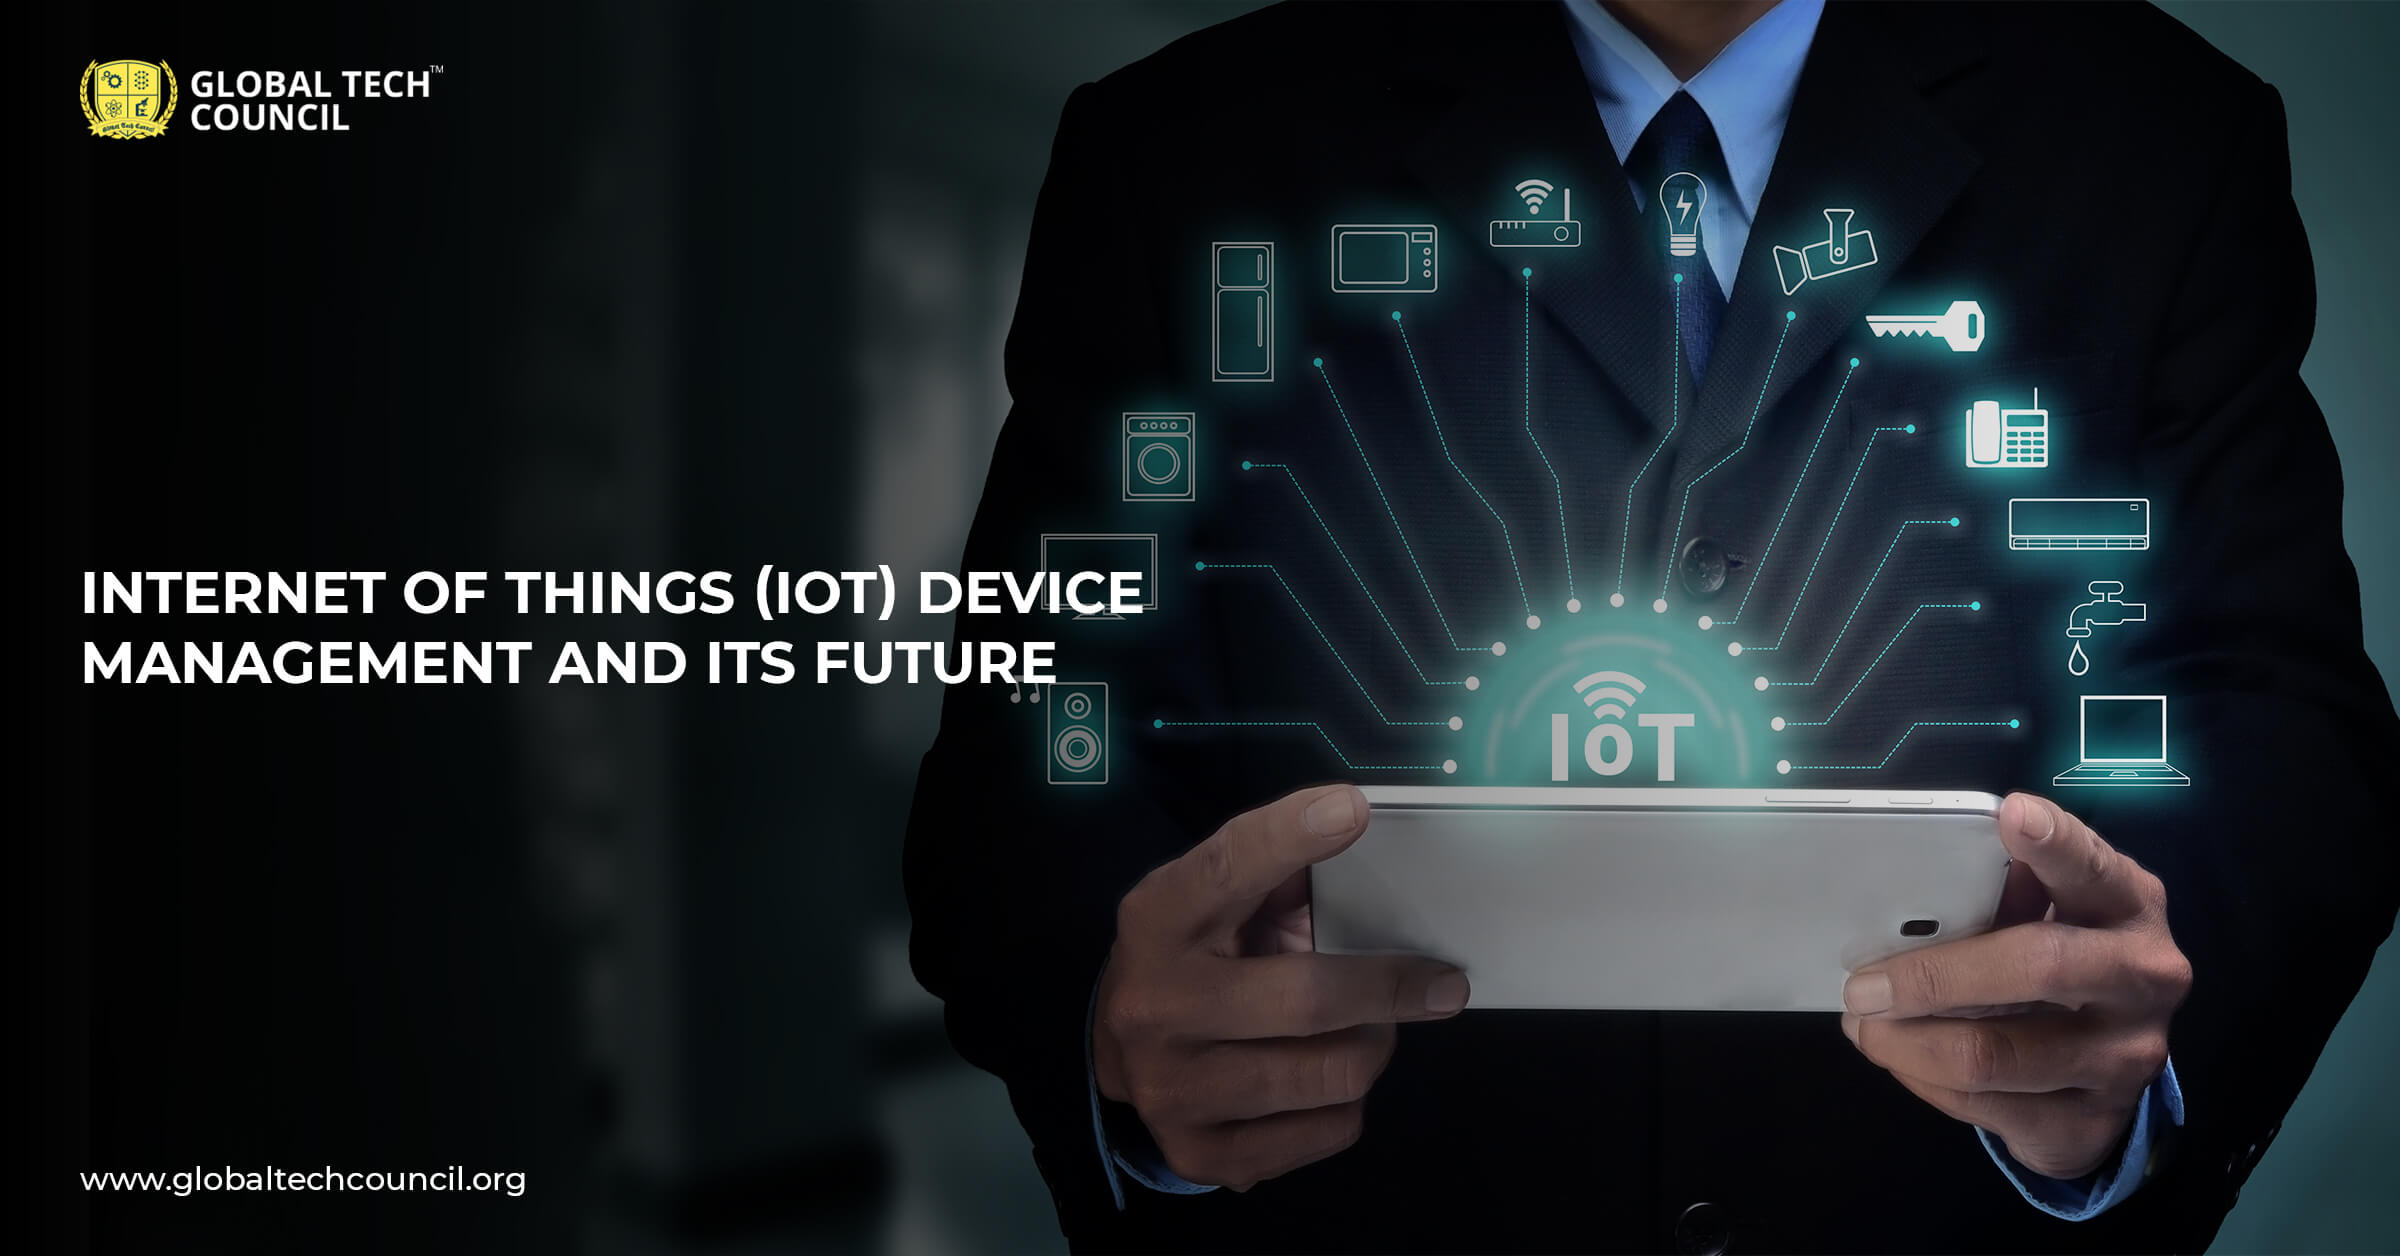 Internet of Things (IoT) Device Management And Its Future